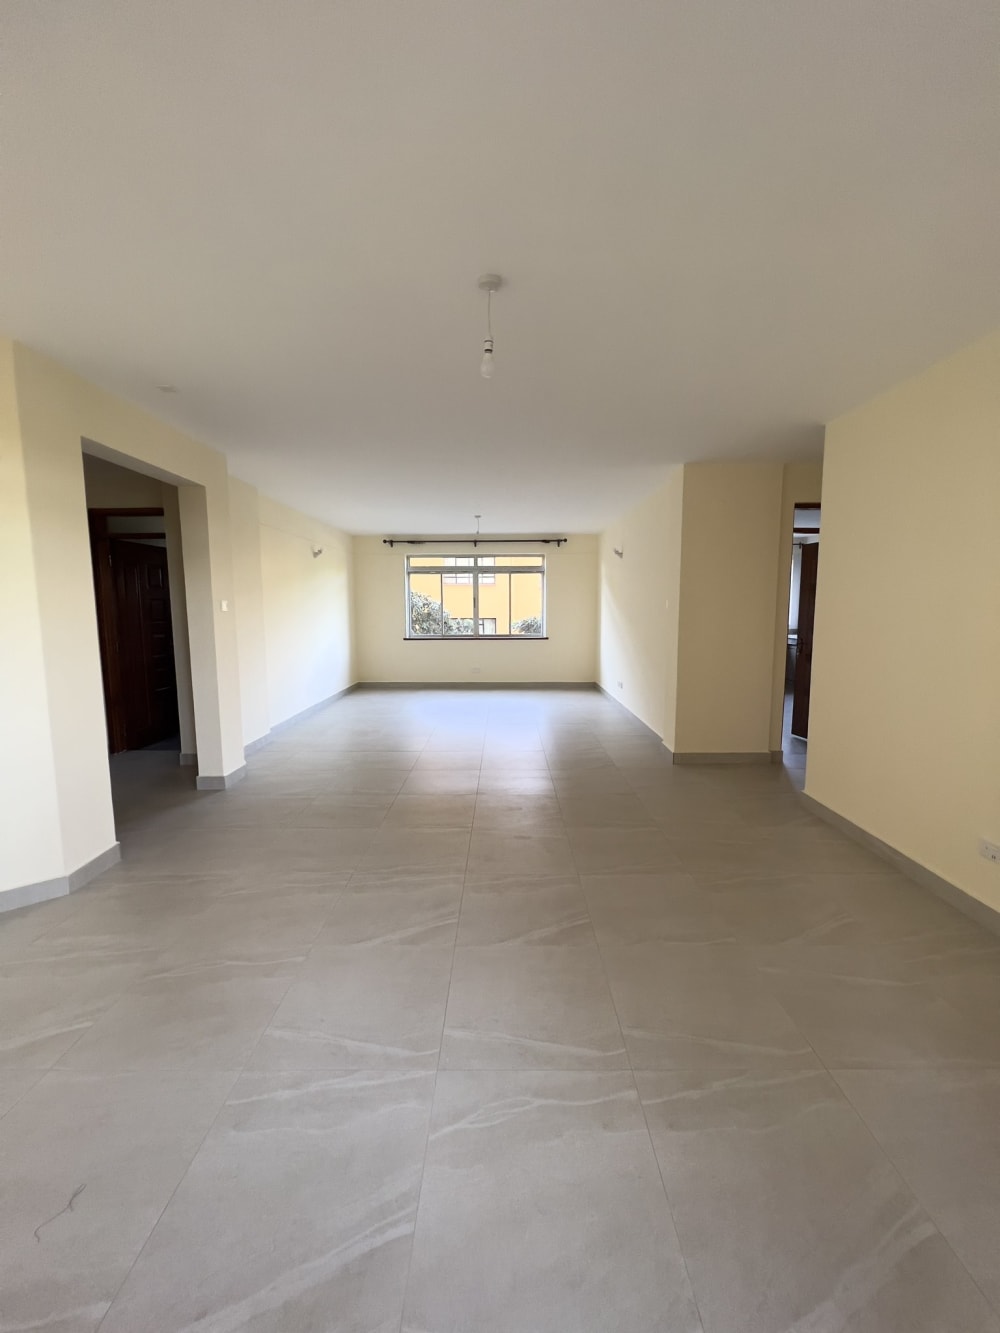 3 bedroom House for rent in Ngong Road